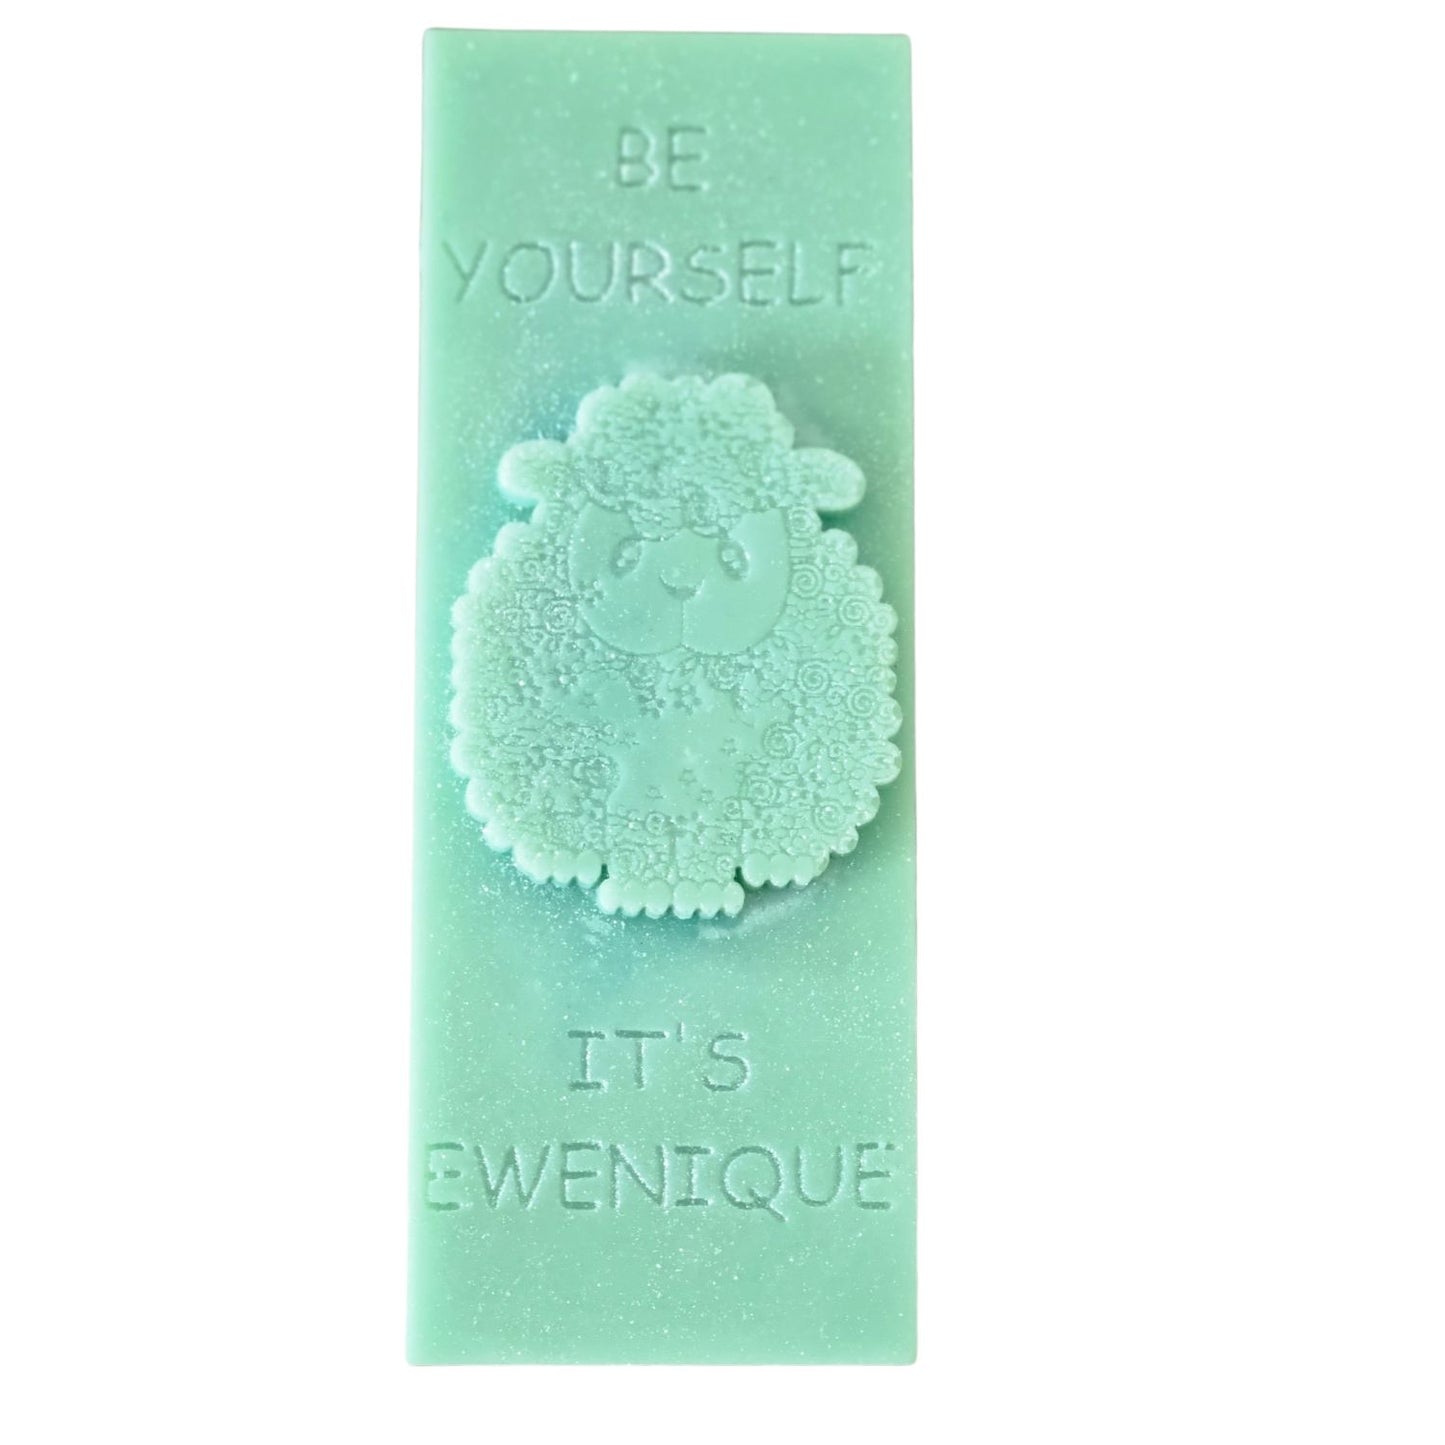 A green coloured wax melt bar with a raised sheep design with the writing be yourself above and it's ewenique below.